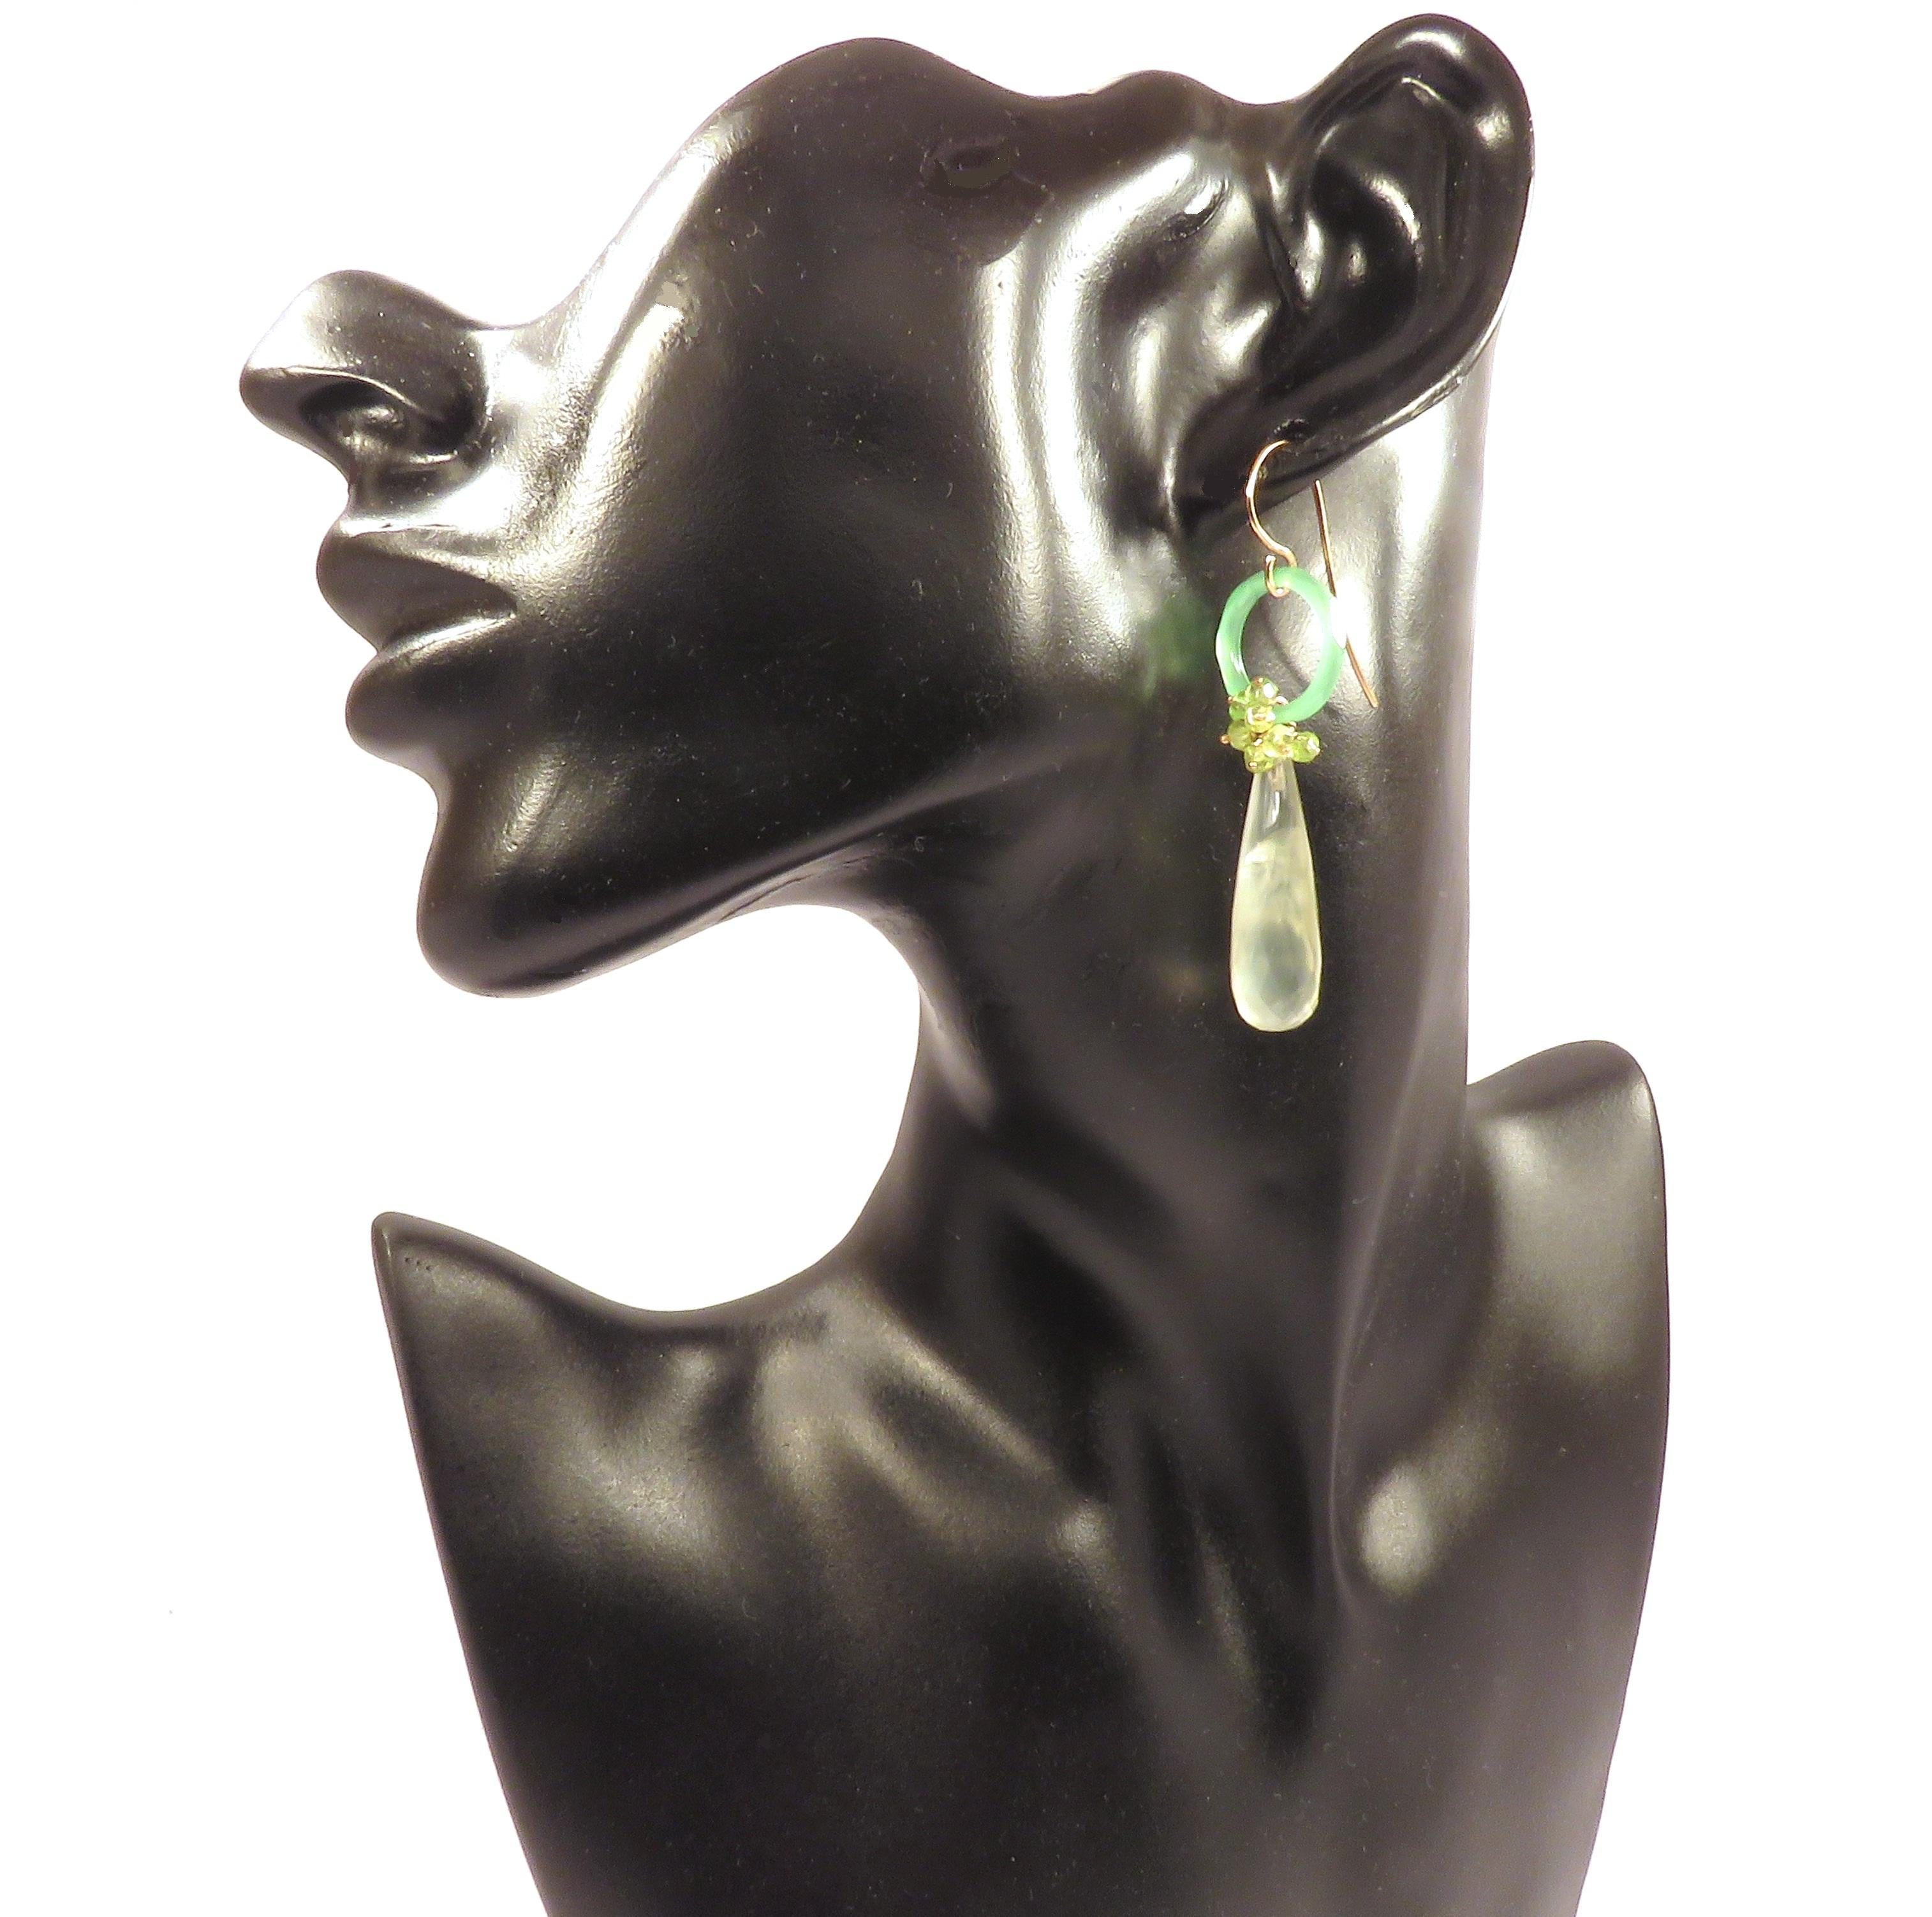 Dangle earrings in 9 karat rose gold with real green chalcedony drops and peridot gemstones. The length of each earring is 58 mm / 2.283 inches. Each item is stamped with the Italian gold mark 375 and Botta Gioielli brandmark